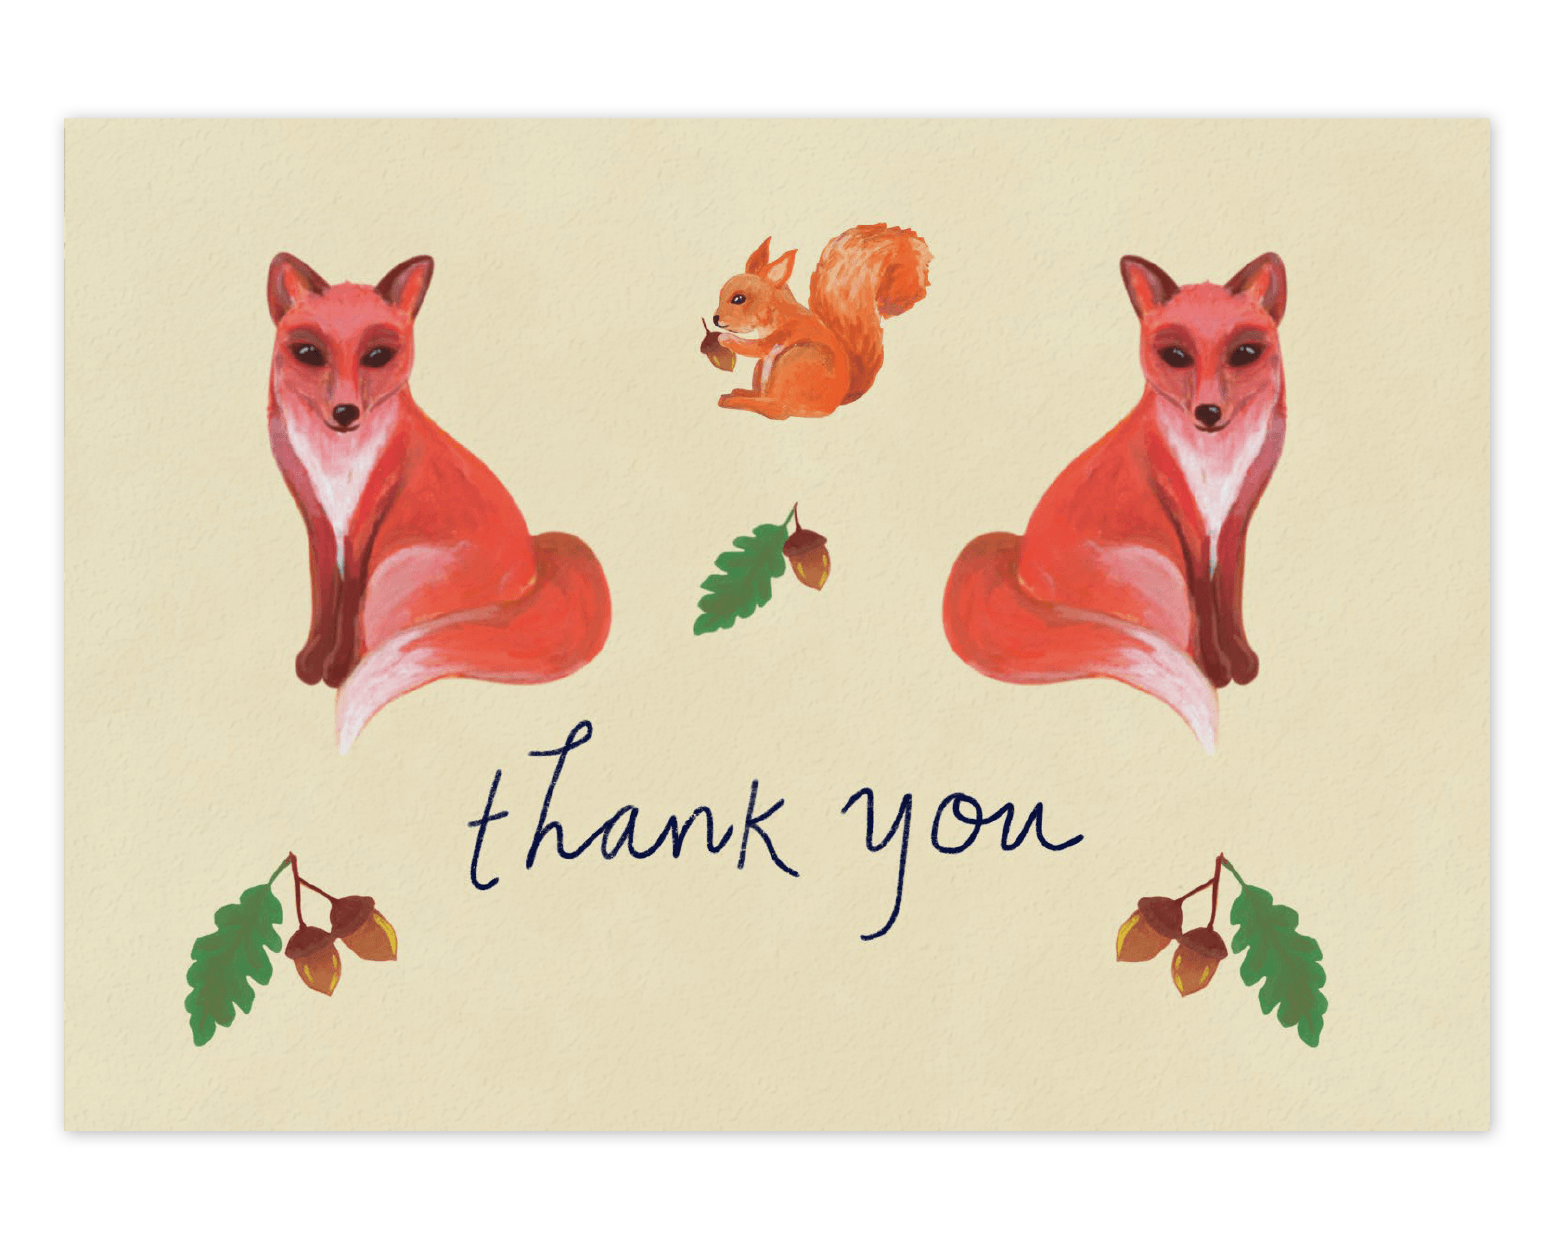  Our new Forest Creatures design with two red/orange foxes facing away from each other with an orange squirrel between them facing left with an Acorn in its hands. Below are the words &quot;Thank You&quot; printed in cursive black ink with two stems of Acorns on either side and a stem of an acorn above. Printed on a cream colored background.